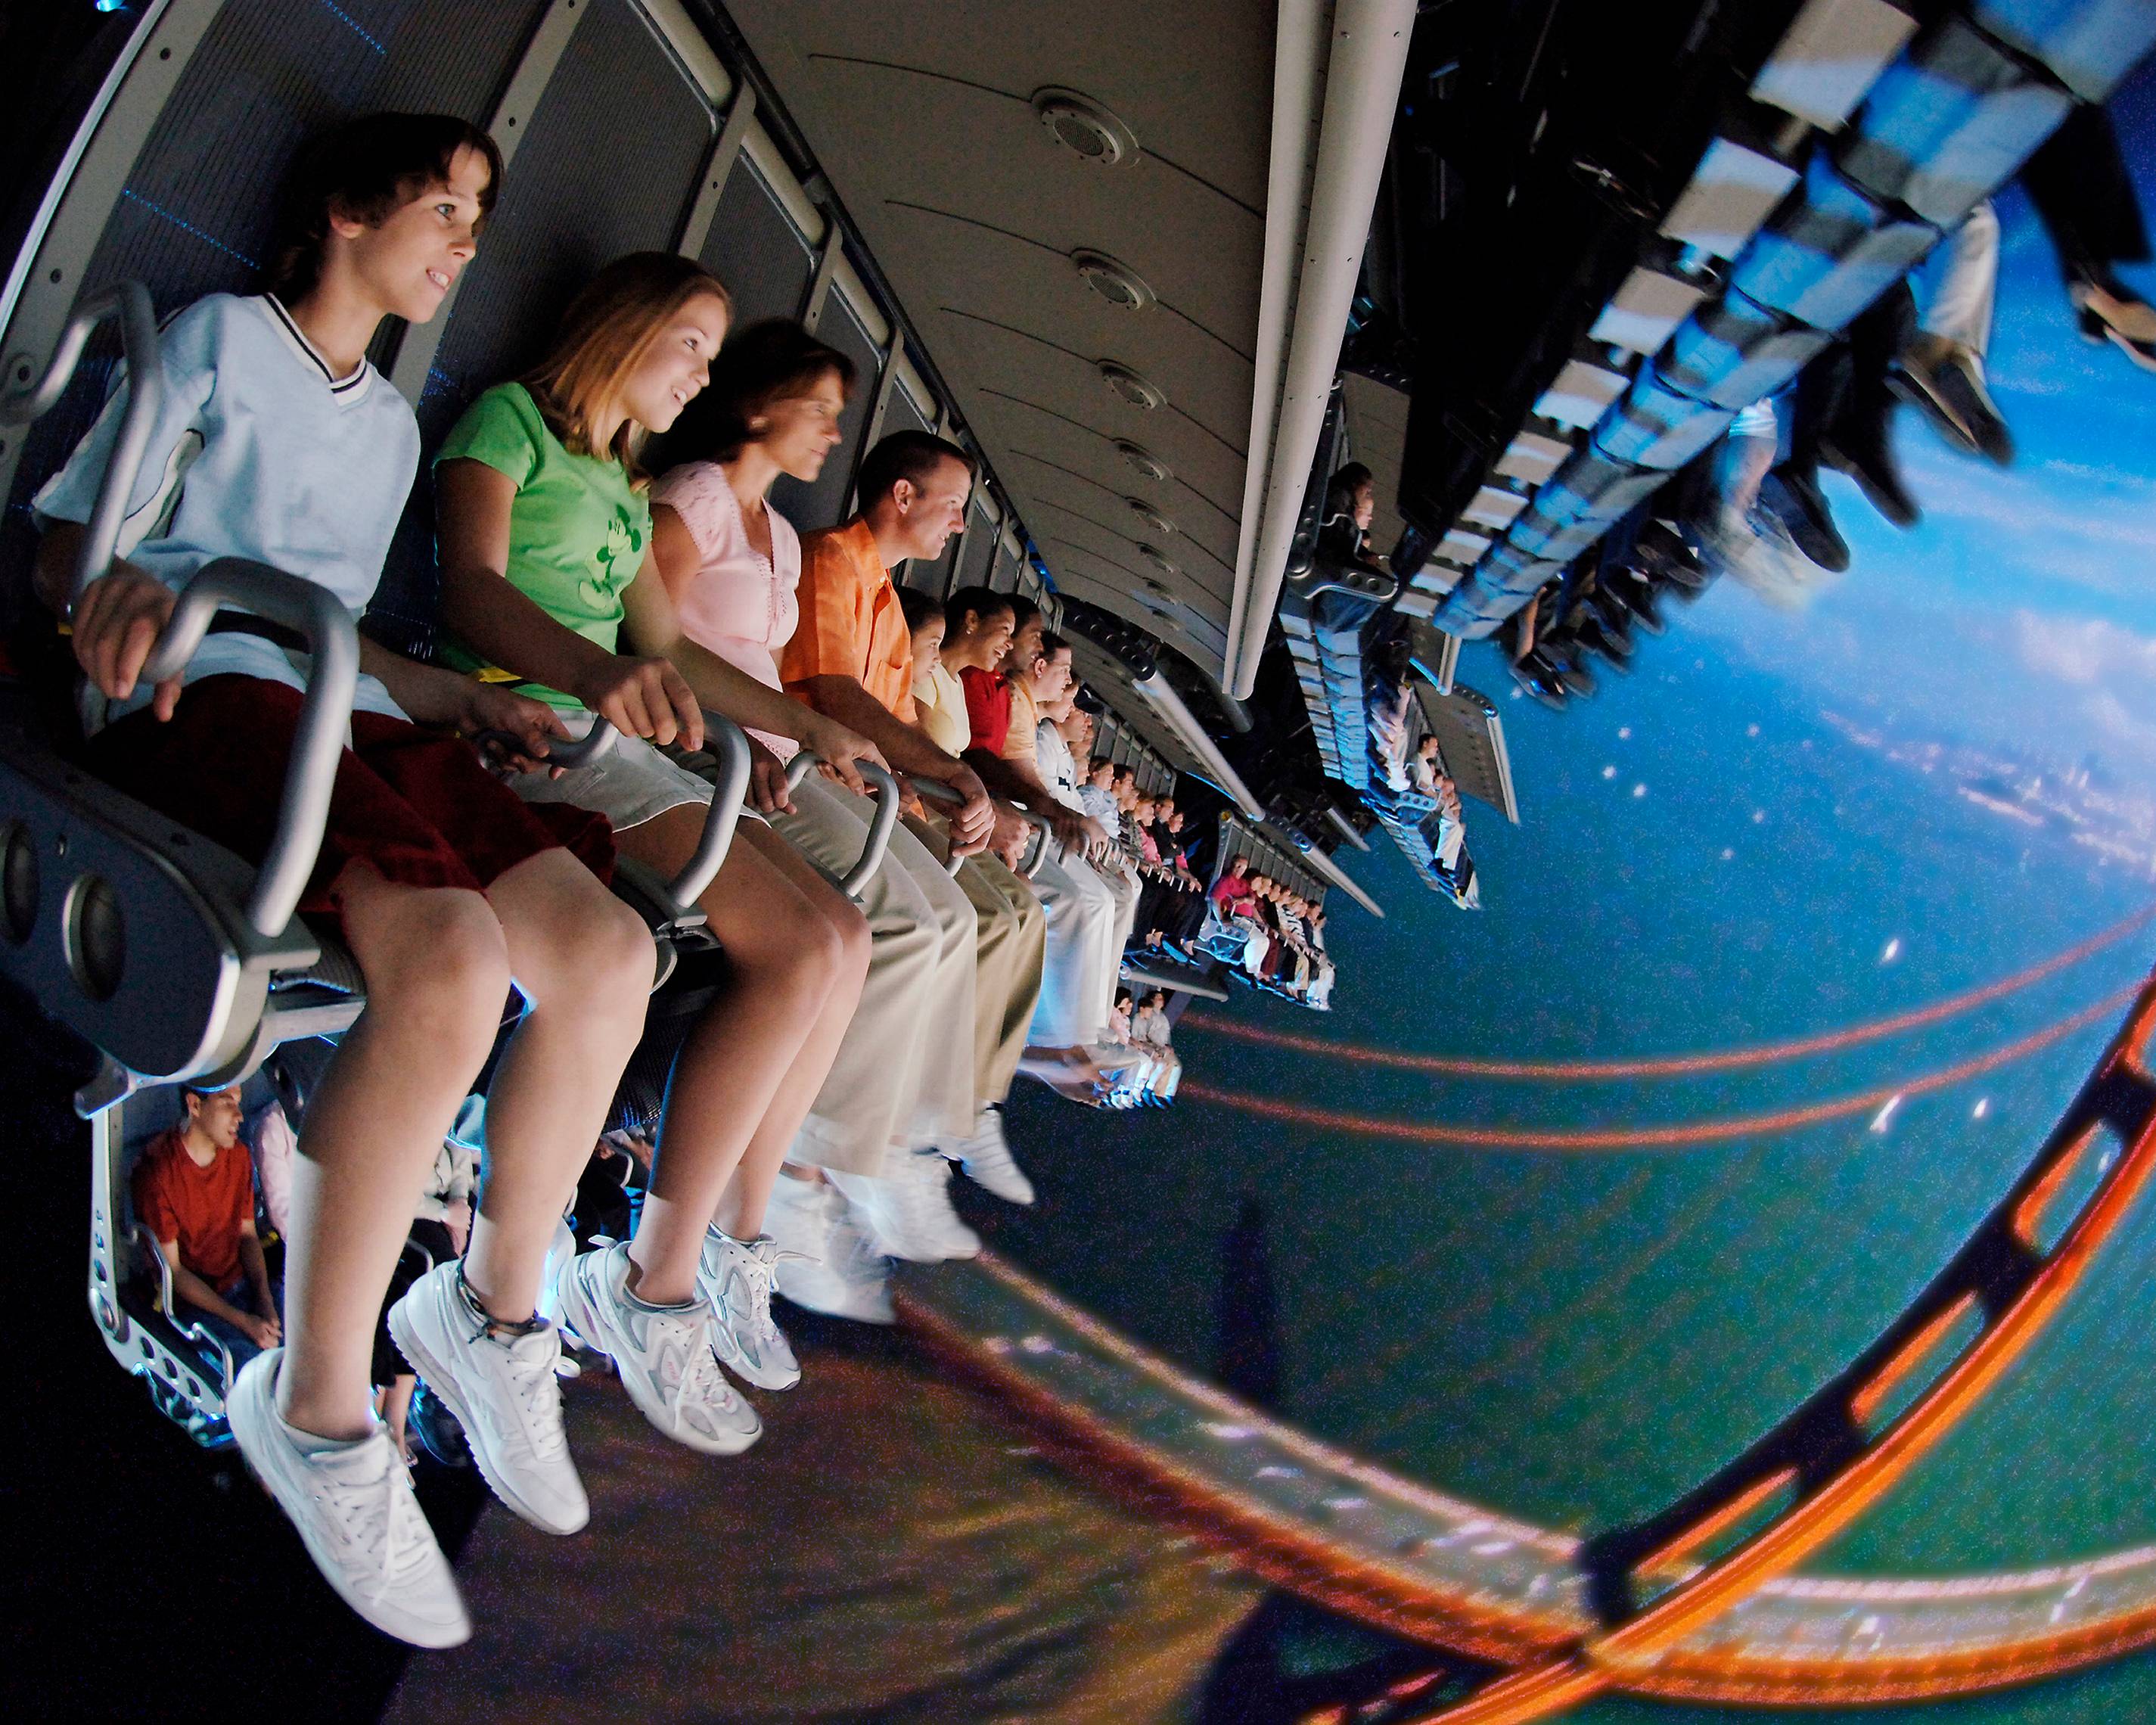 Soarin' overview